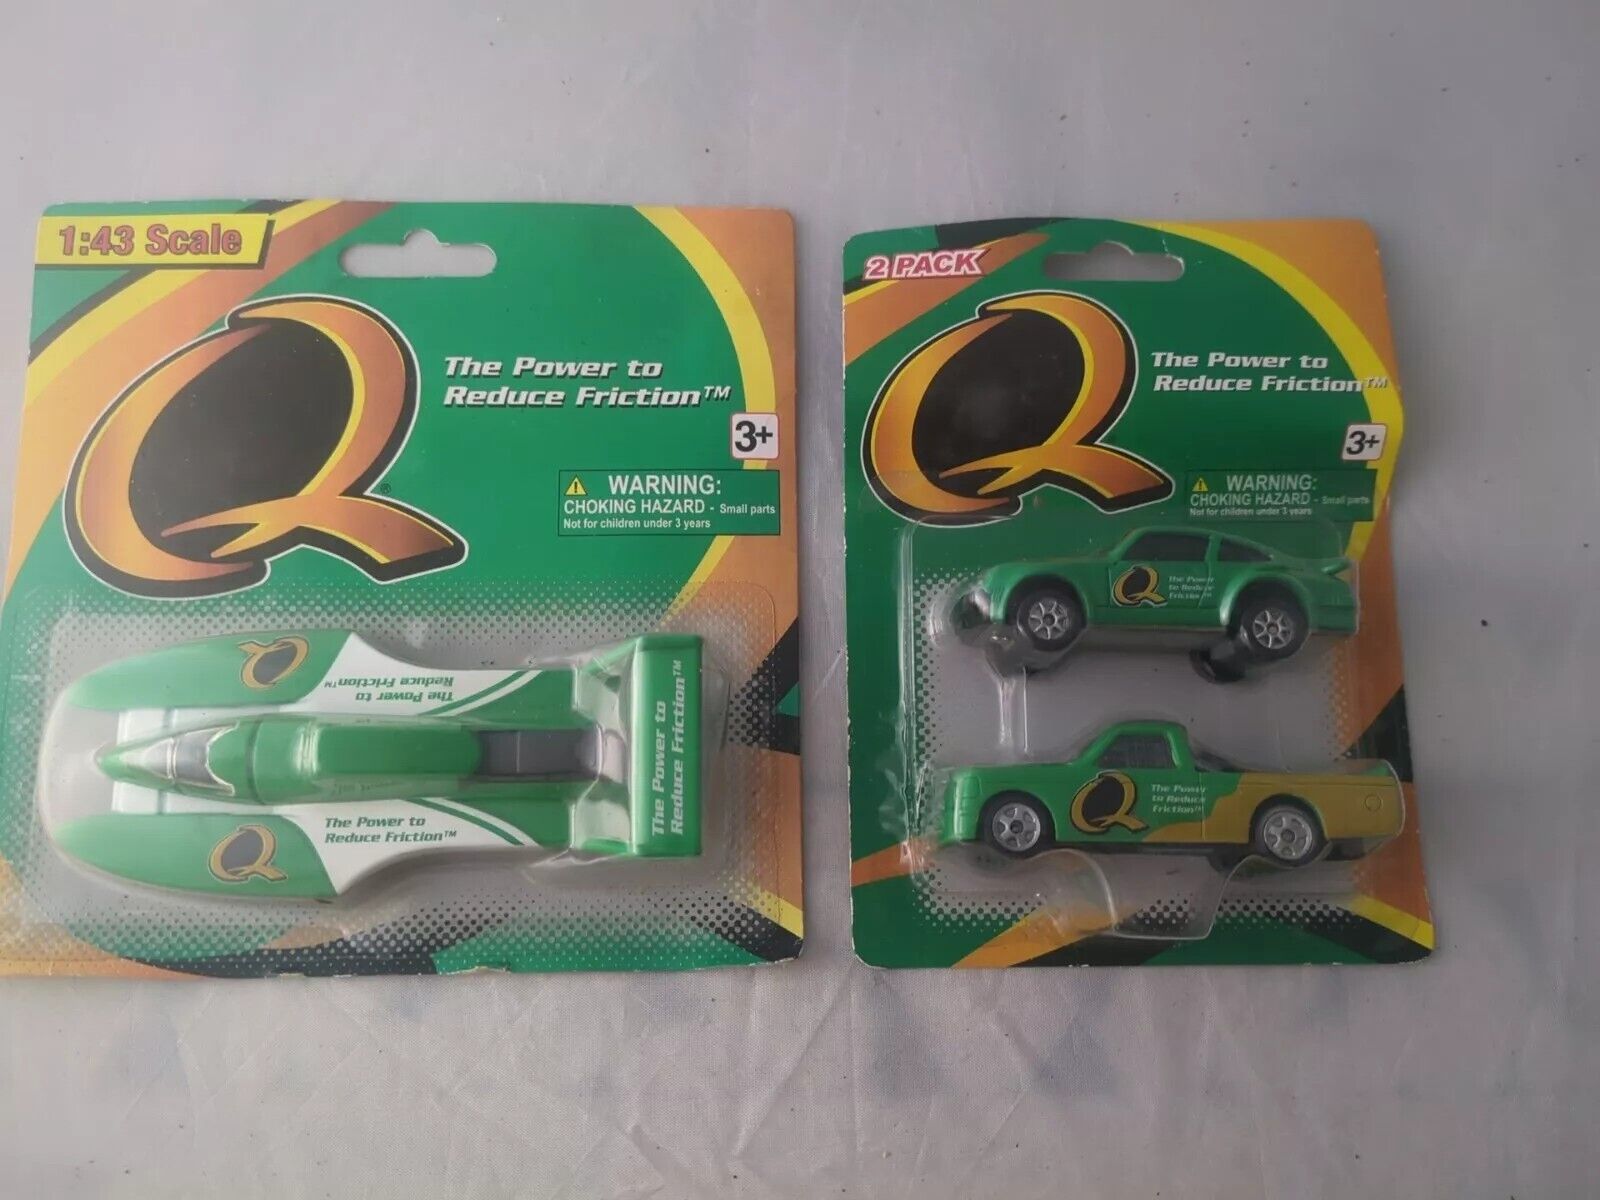 2006 Golden Wheel USA Diecast Q Quaker State hydro boat and car 2 pack lot